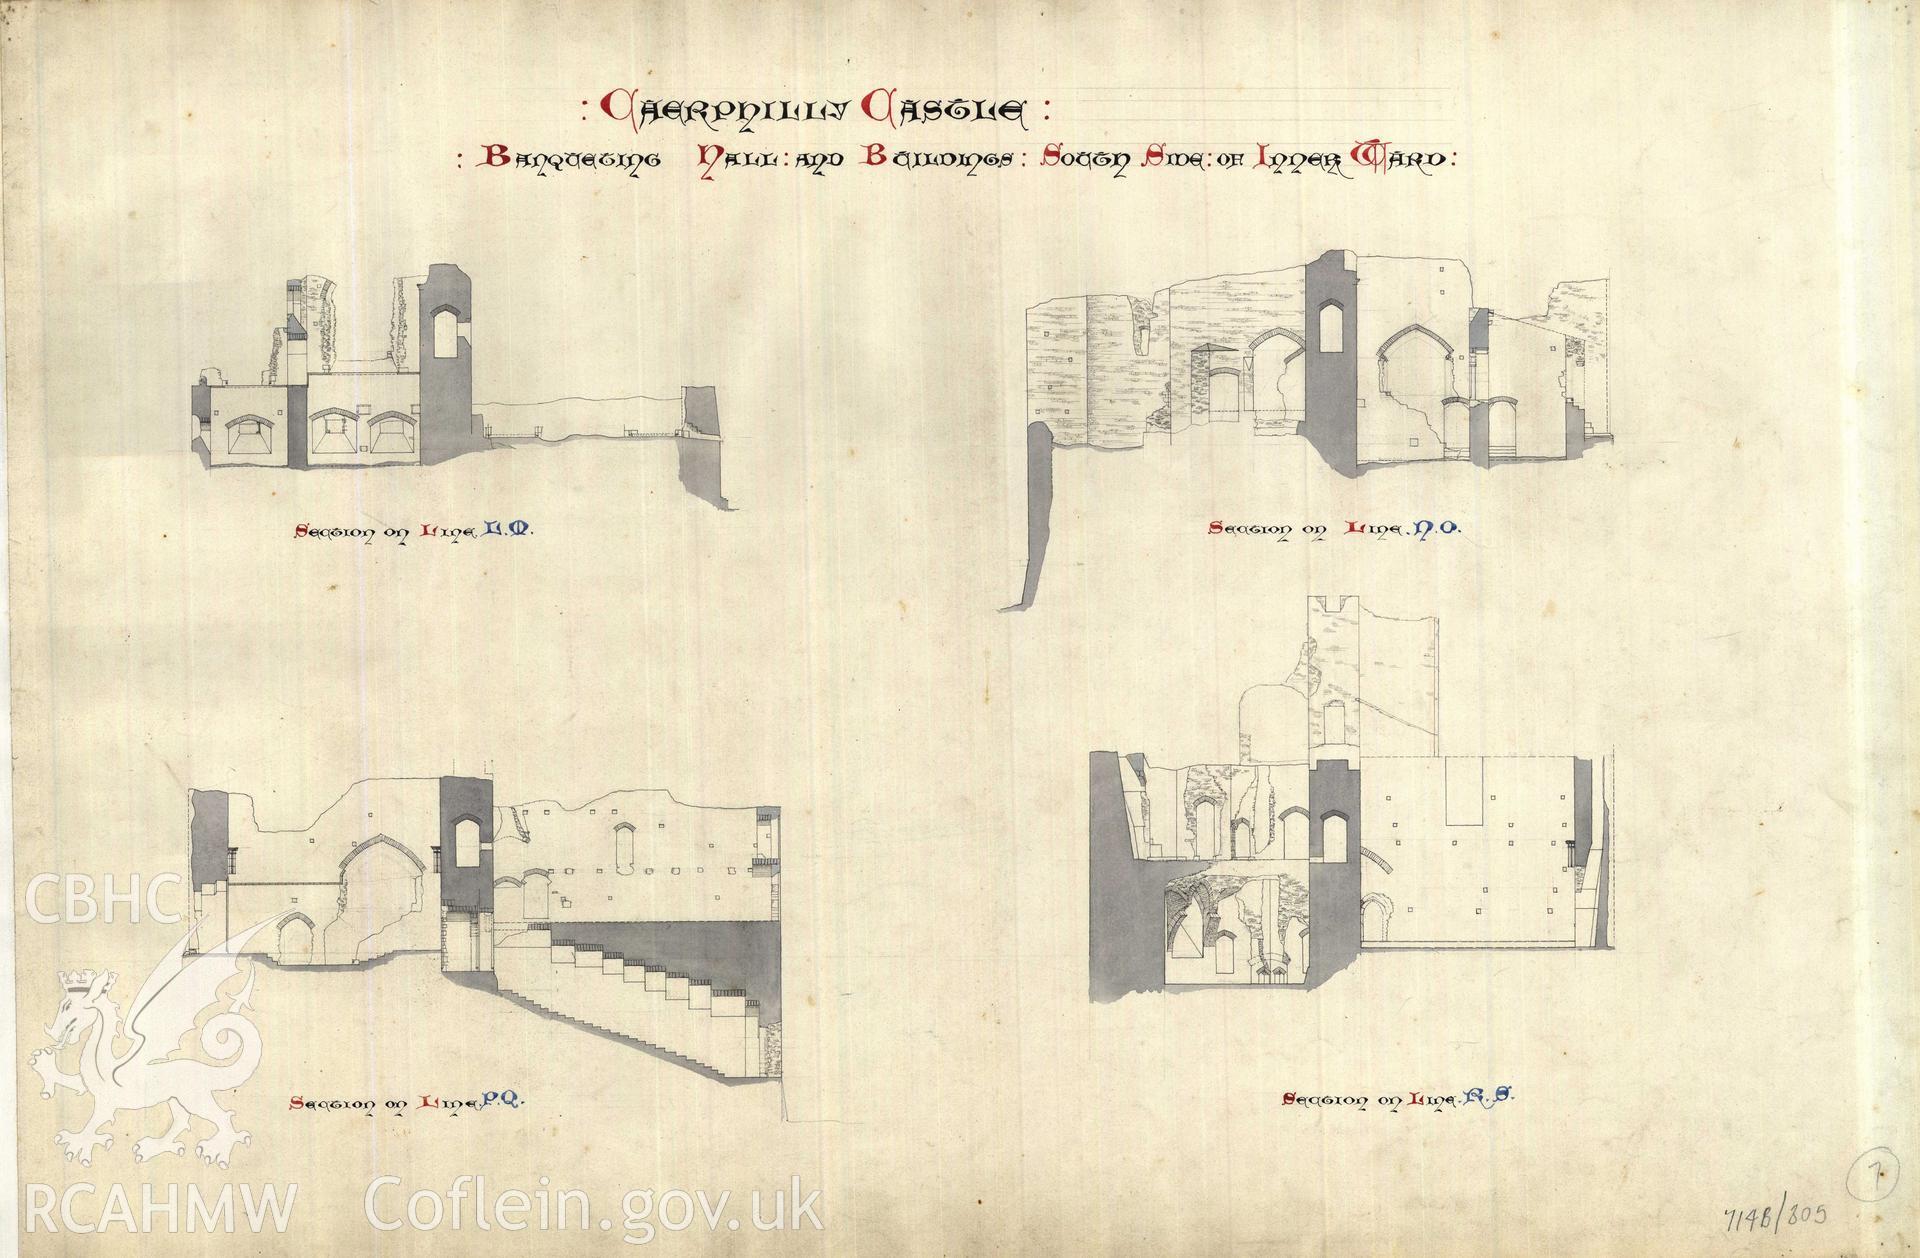 Cadw guardianship monument drawing of Caerphilly Castle. Hall range, 4 cross sections. Cadw Ref. No:714B/305. Scale 1:96.